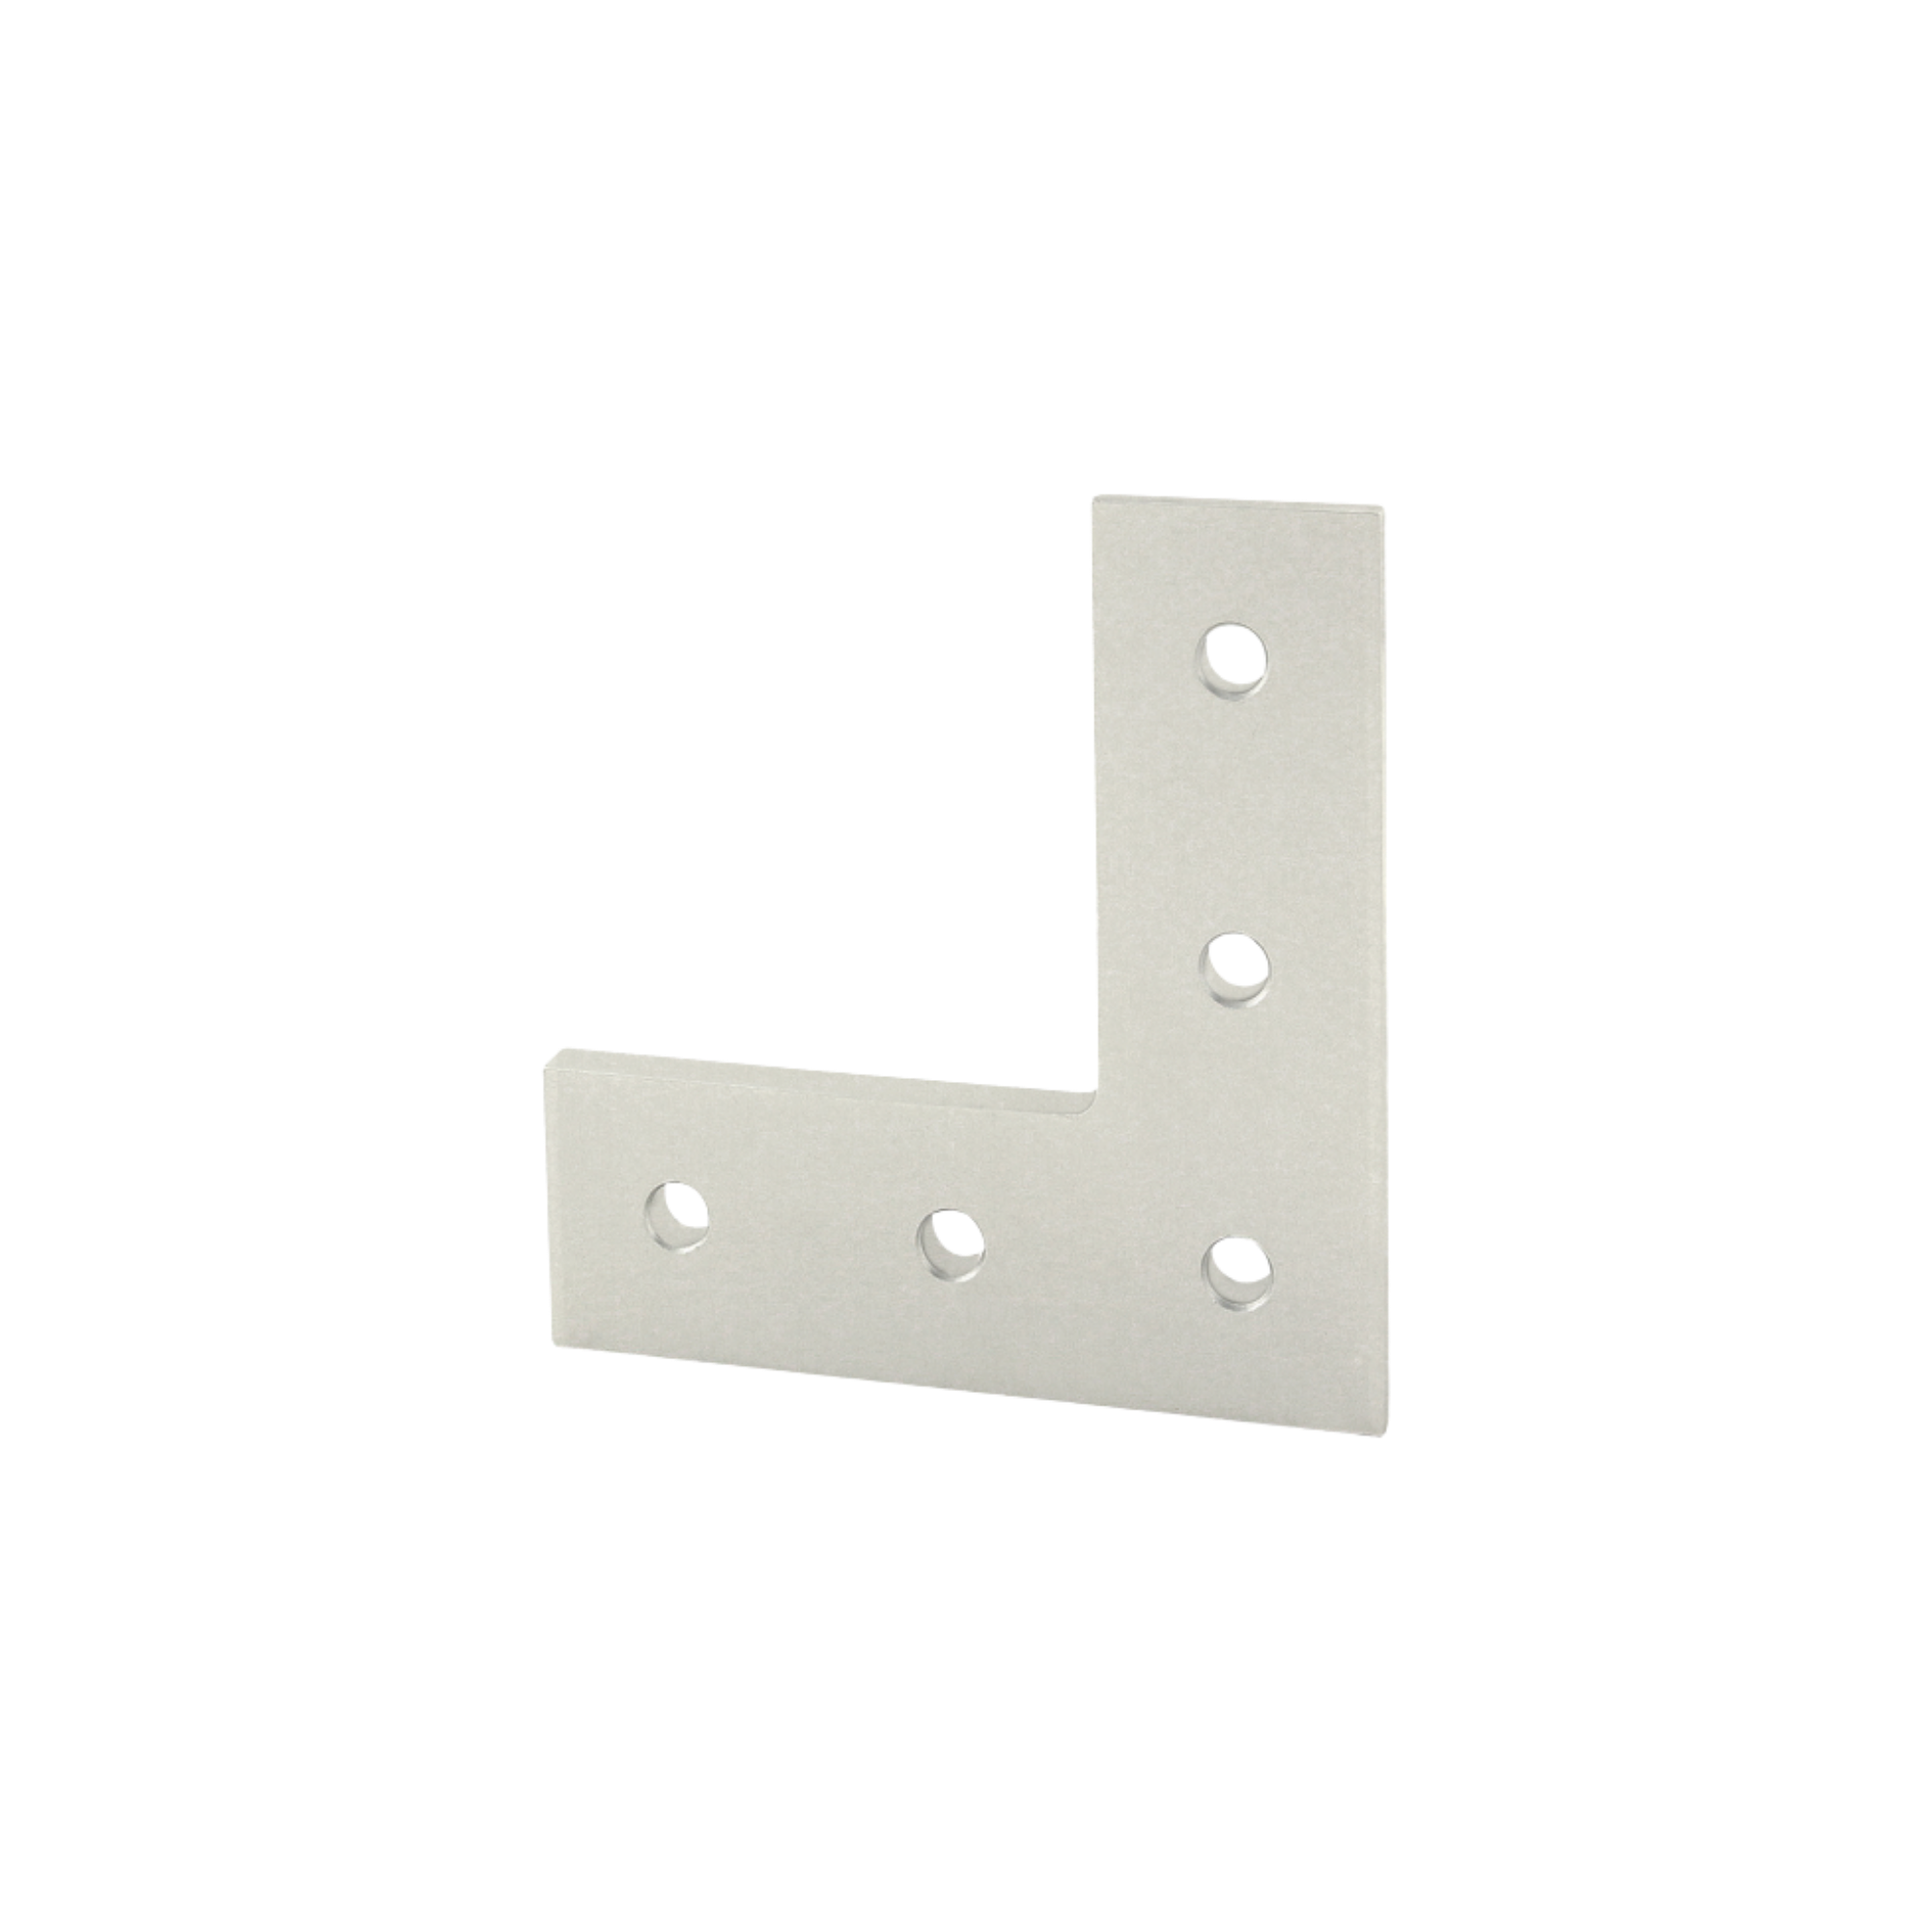 front view of a flat L shape plate with three holes on the bottom side and two holes on the right side